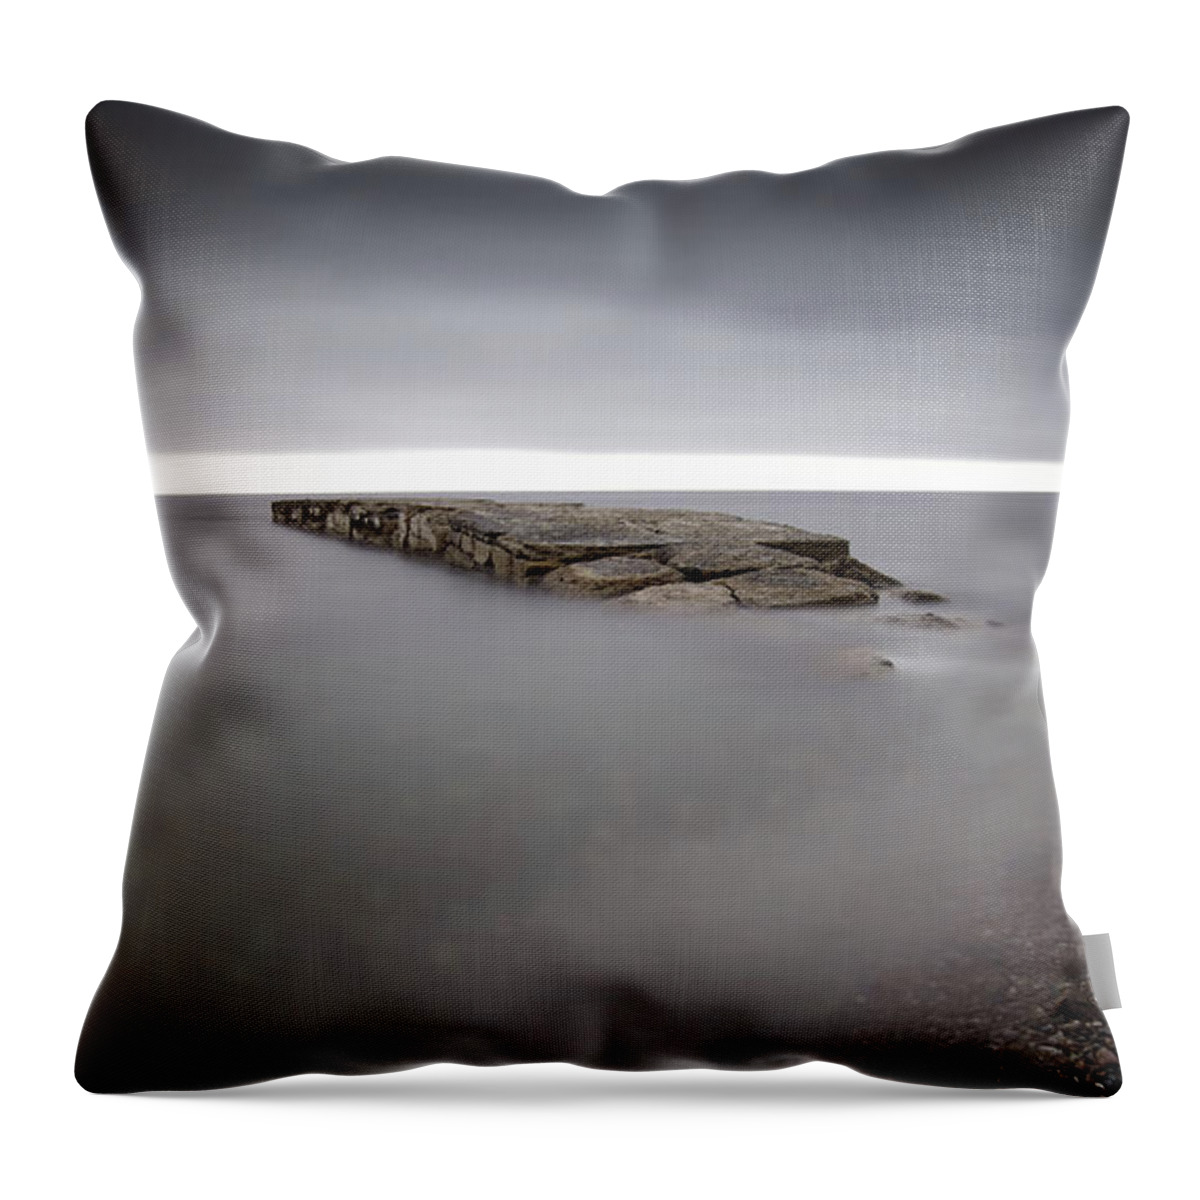  Throw Pillow featuring the photograph The Old Pier by Alberto Audisio